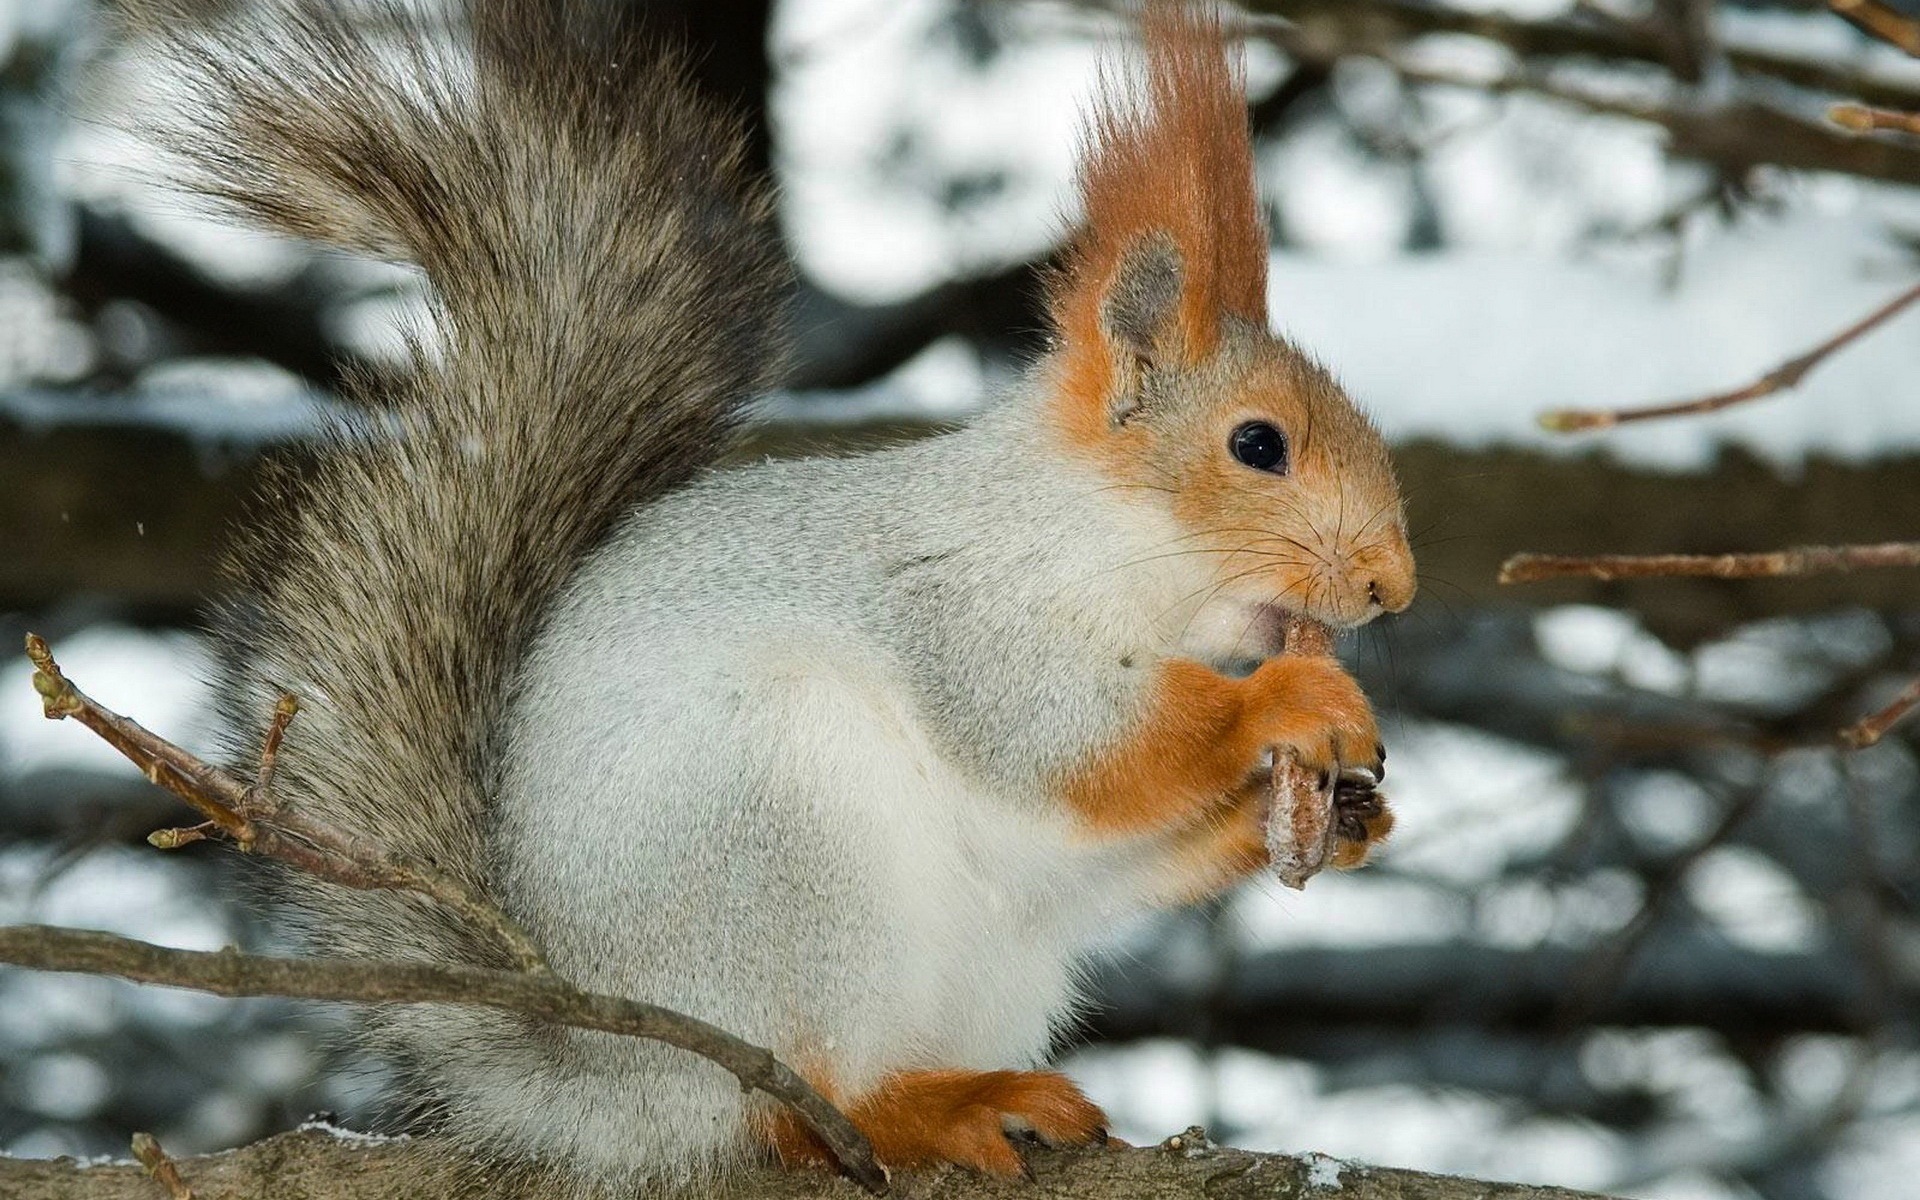 Animal close-up, cute squirrel HD wallpapers #10 - 1920x1200